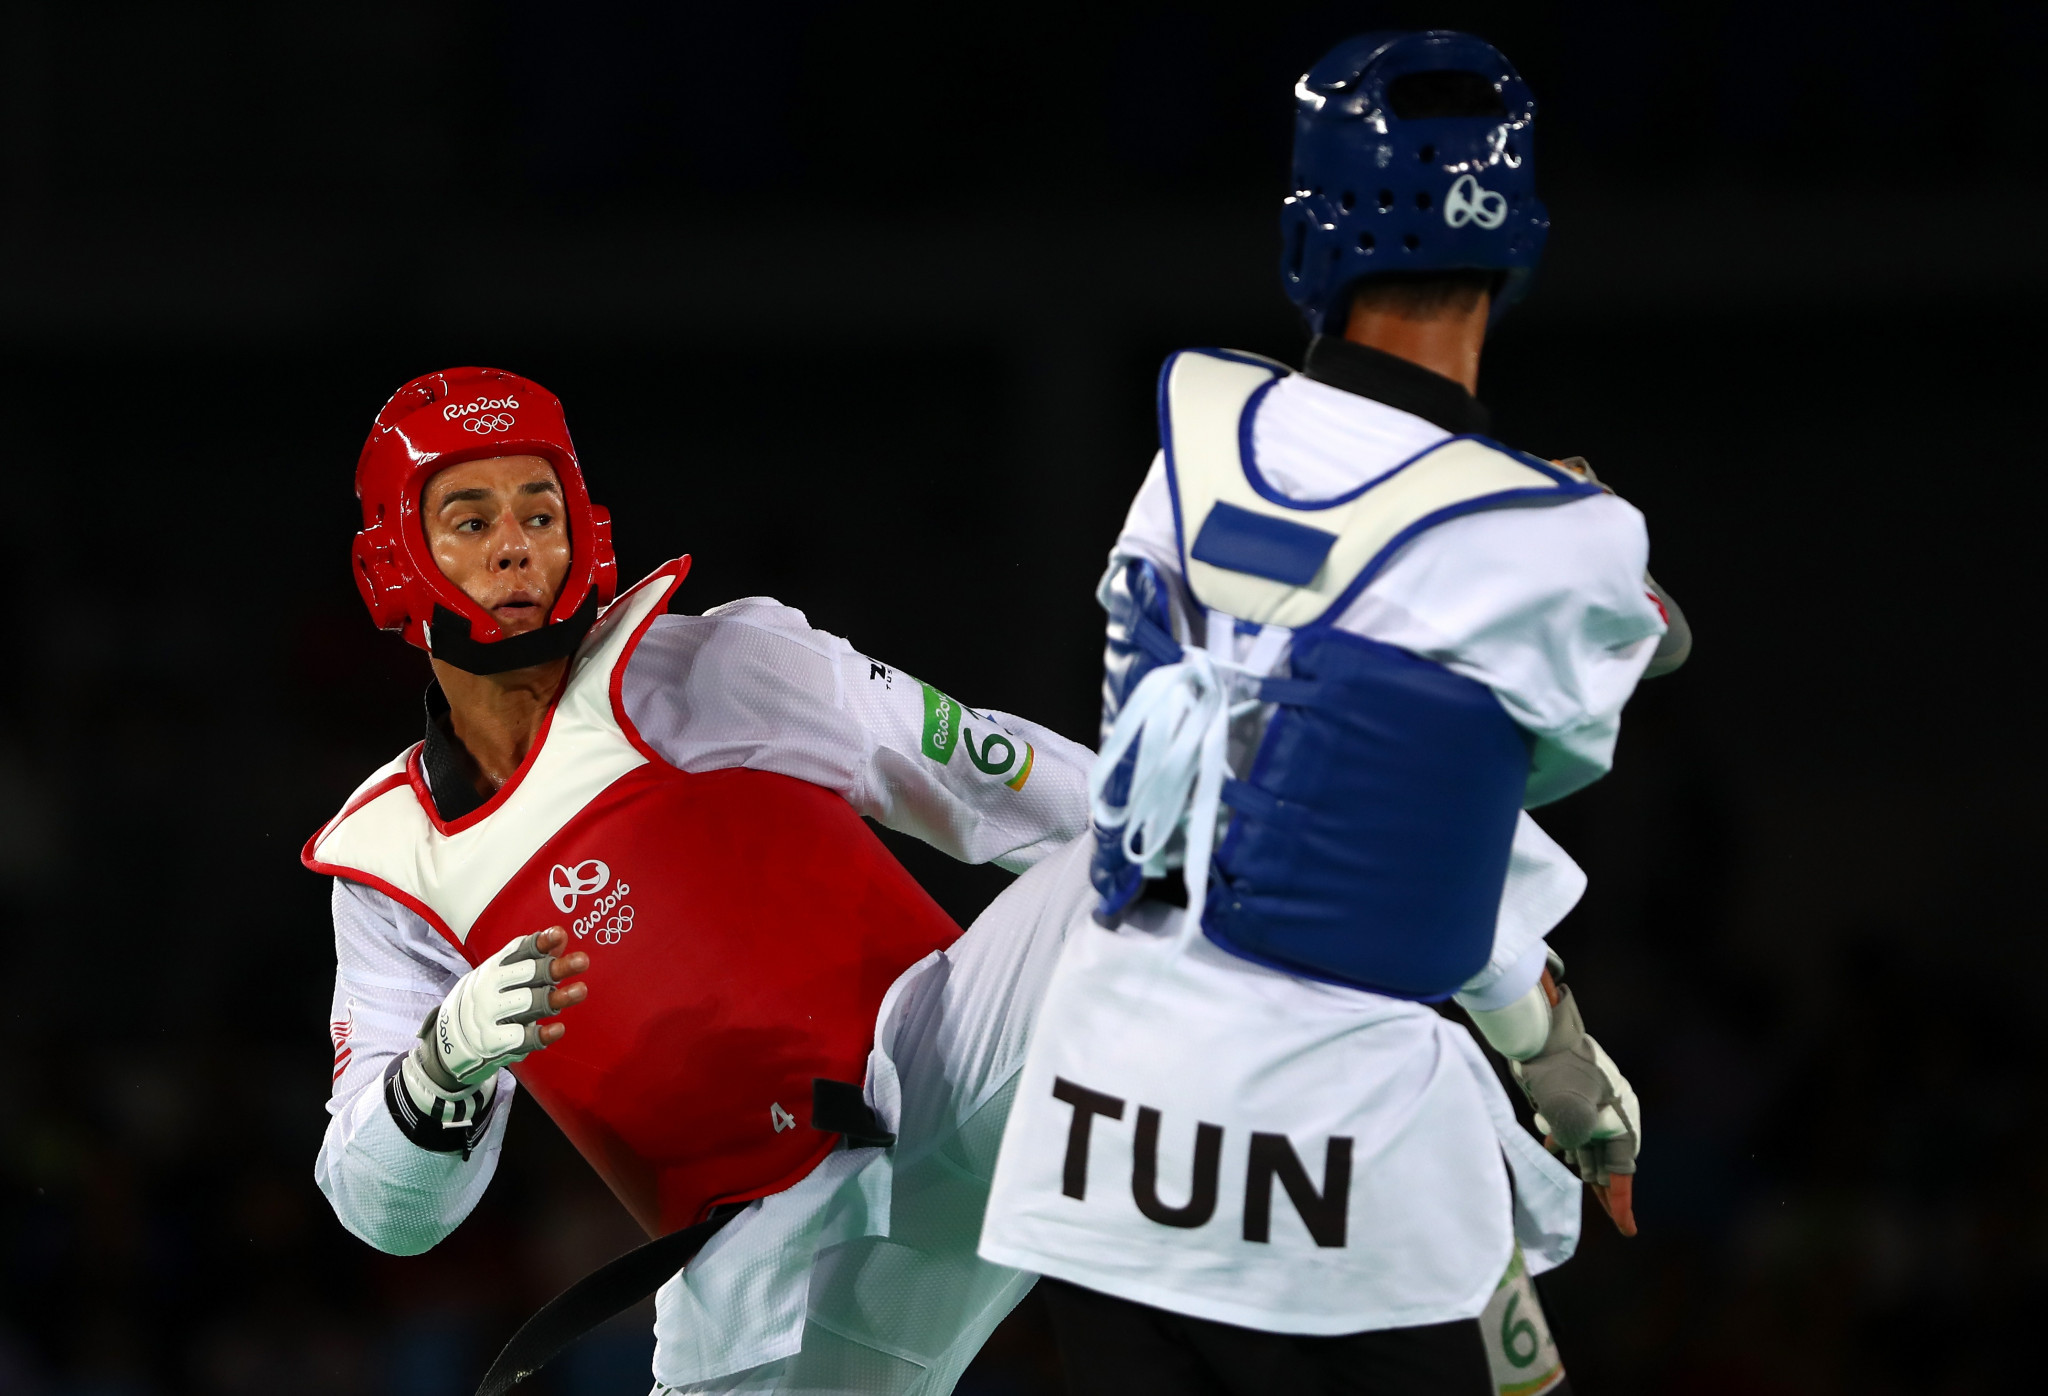 A permanent ban against two-time Olympic taekwondo champion Steven Lopez was overturned by an arbitrator last month ©Getty Images